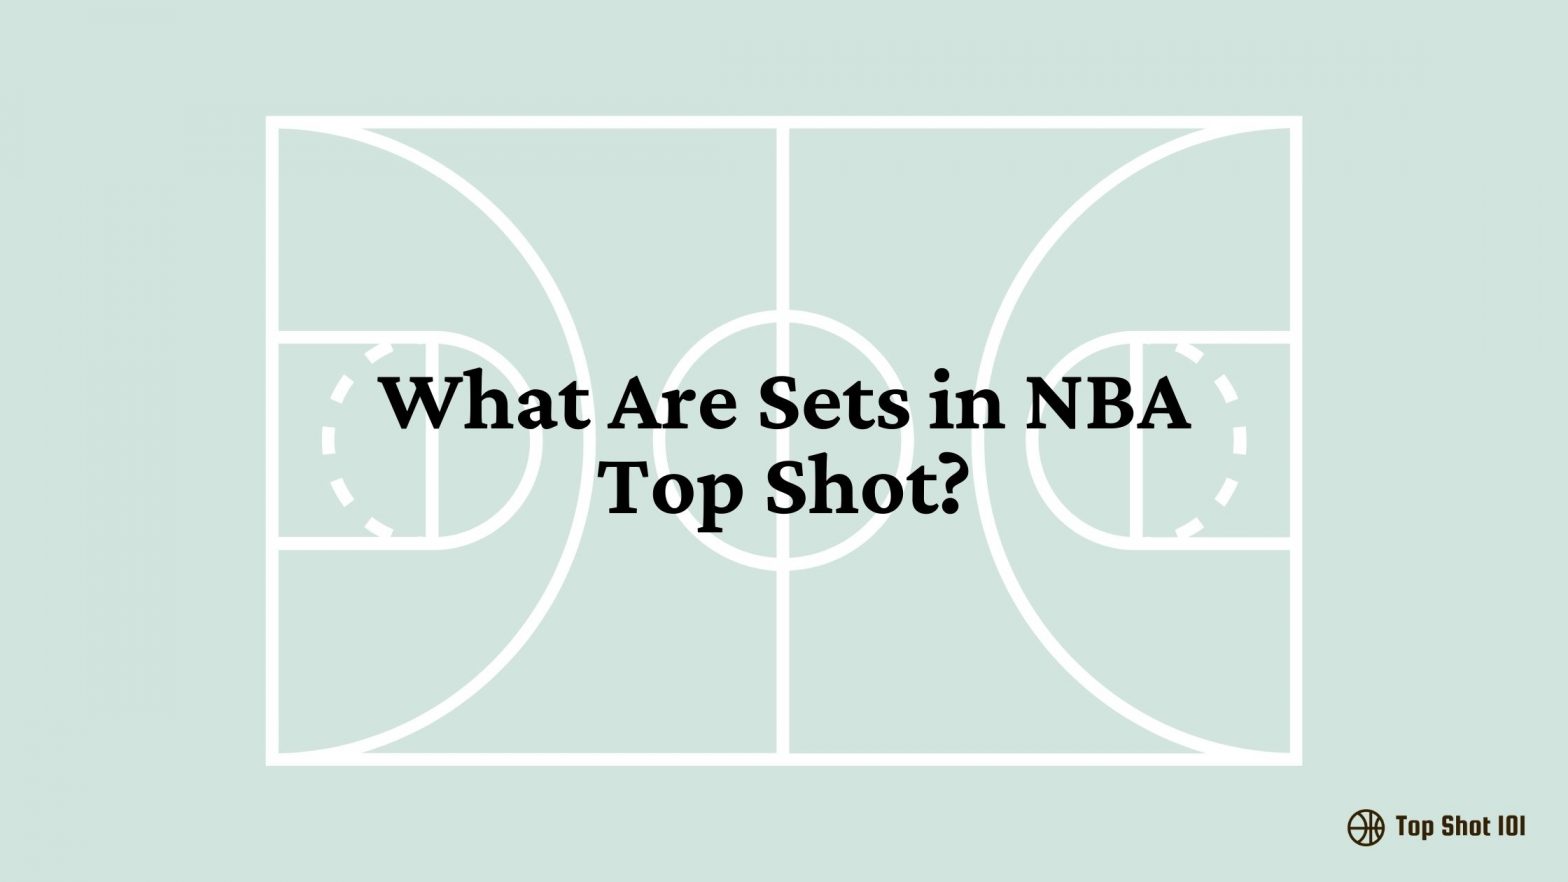 What Are Sets in NBA Top Shot?